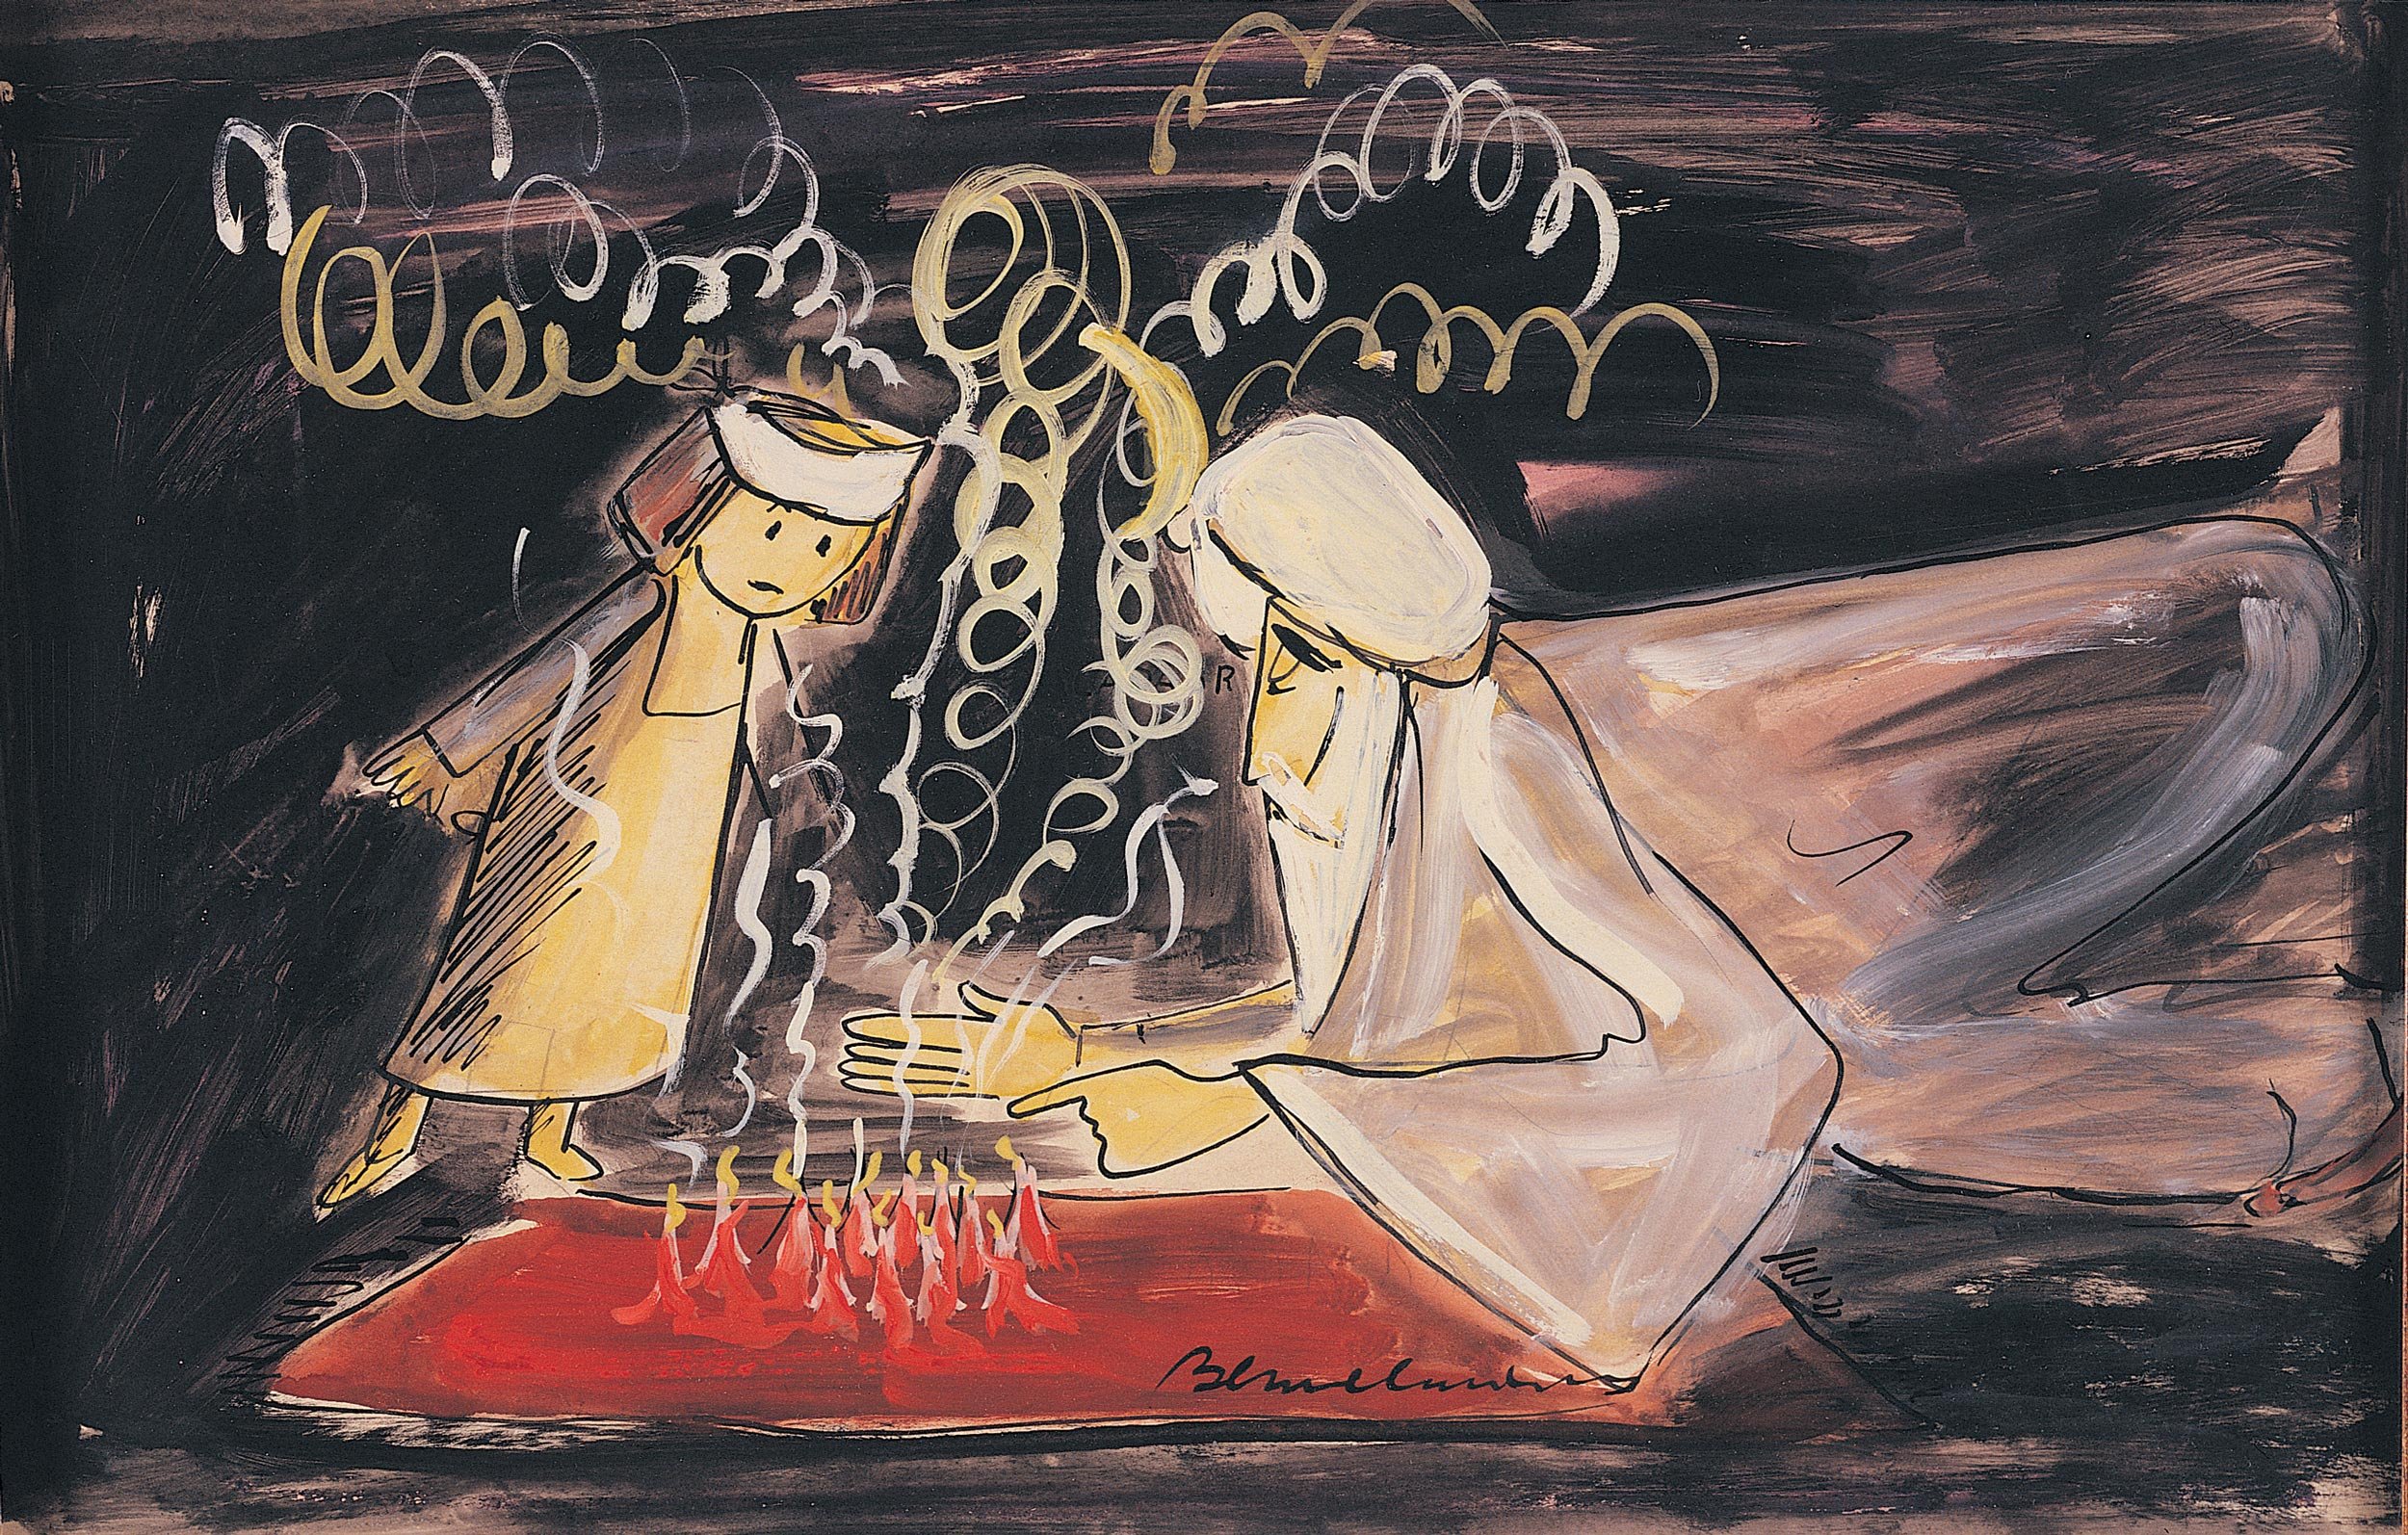   Ludwig Bemelmans (1898-1962)   Madeline’s Christmas  1956, gouache on panel 15” x 24”, signed lower center and inscribed en verso: “He lit incense and mumbled words profound and tragic - ABRA CADABRA BRACADBR RACADAB ACADA CAD A!”  Madeline’s Chris